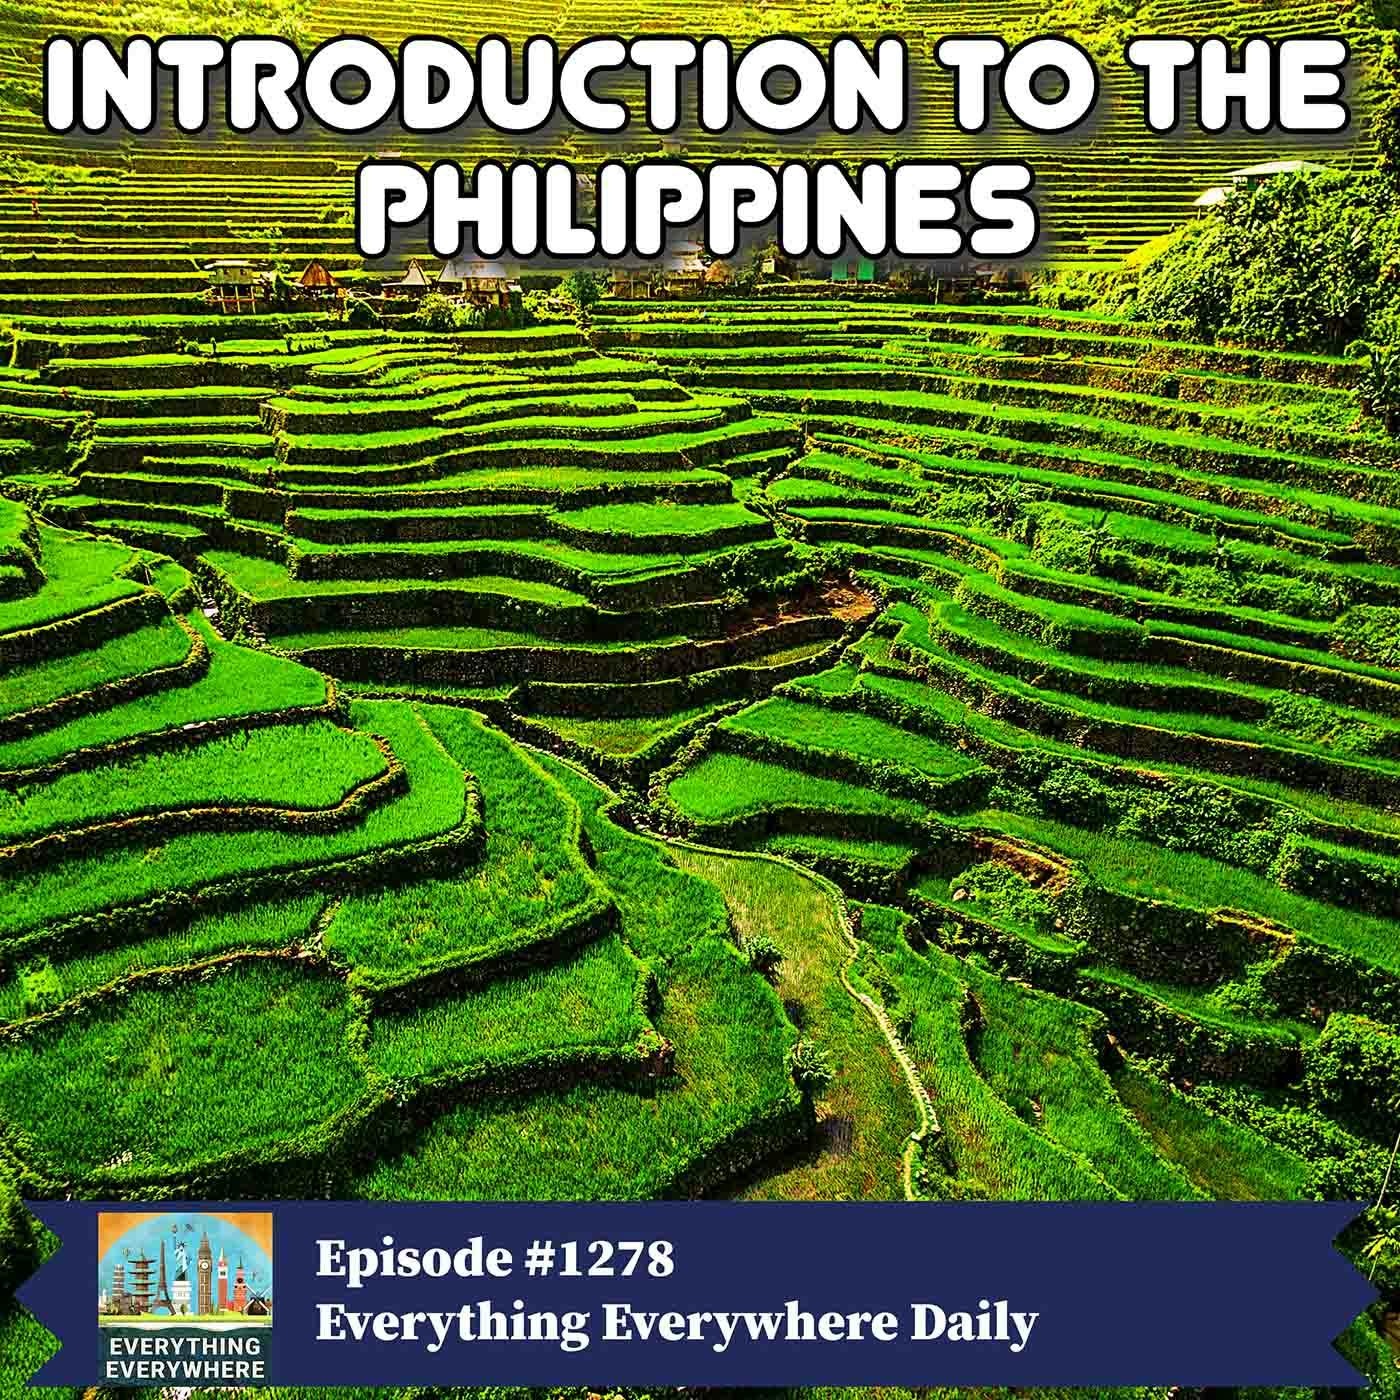 An Introduction to the Philippines